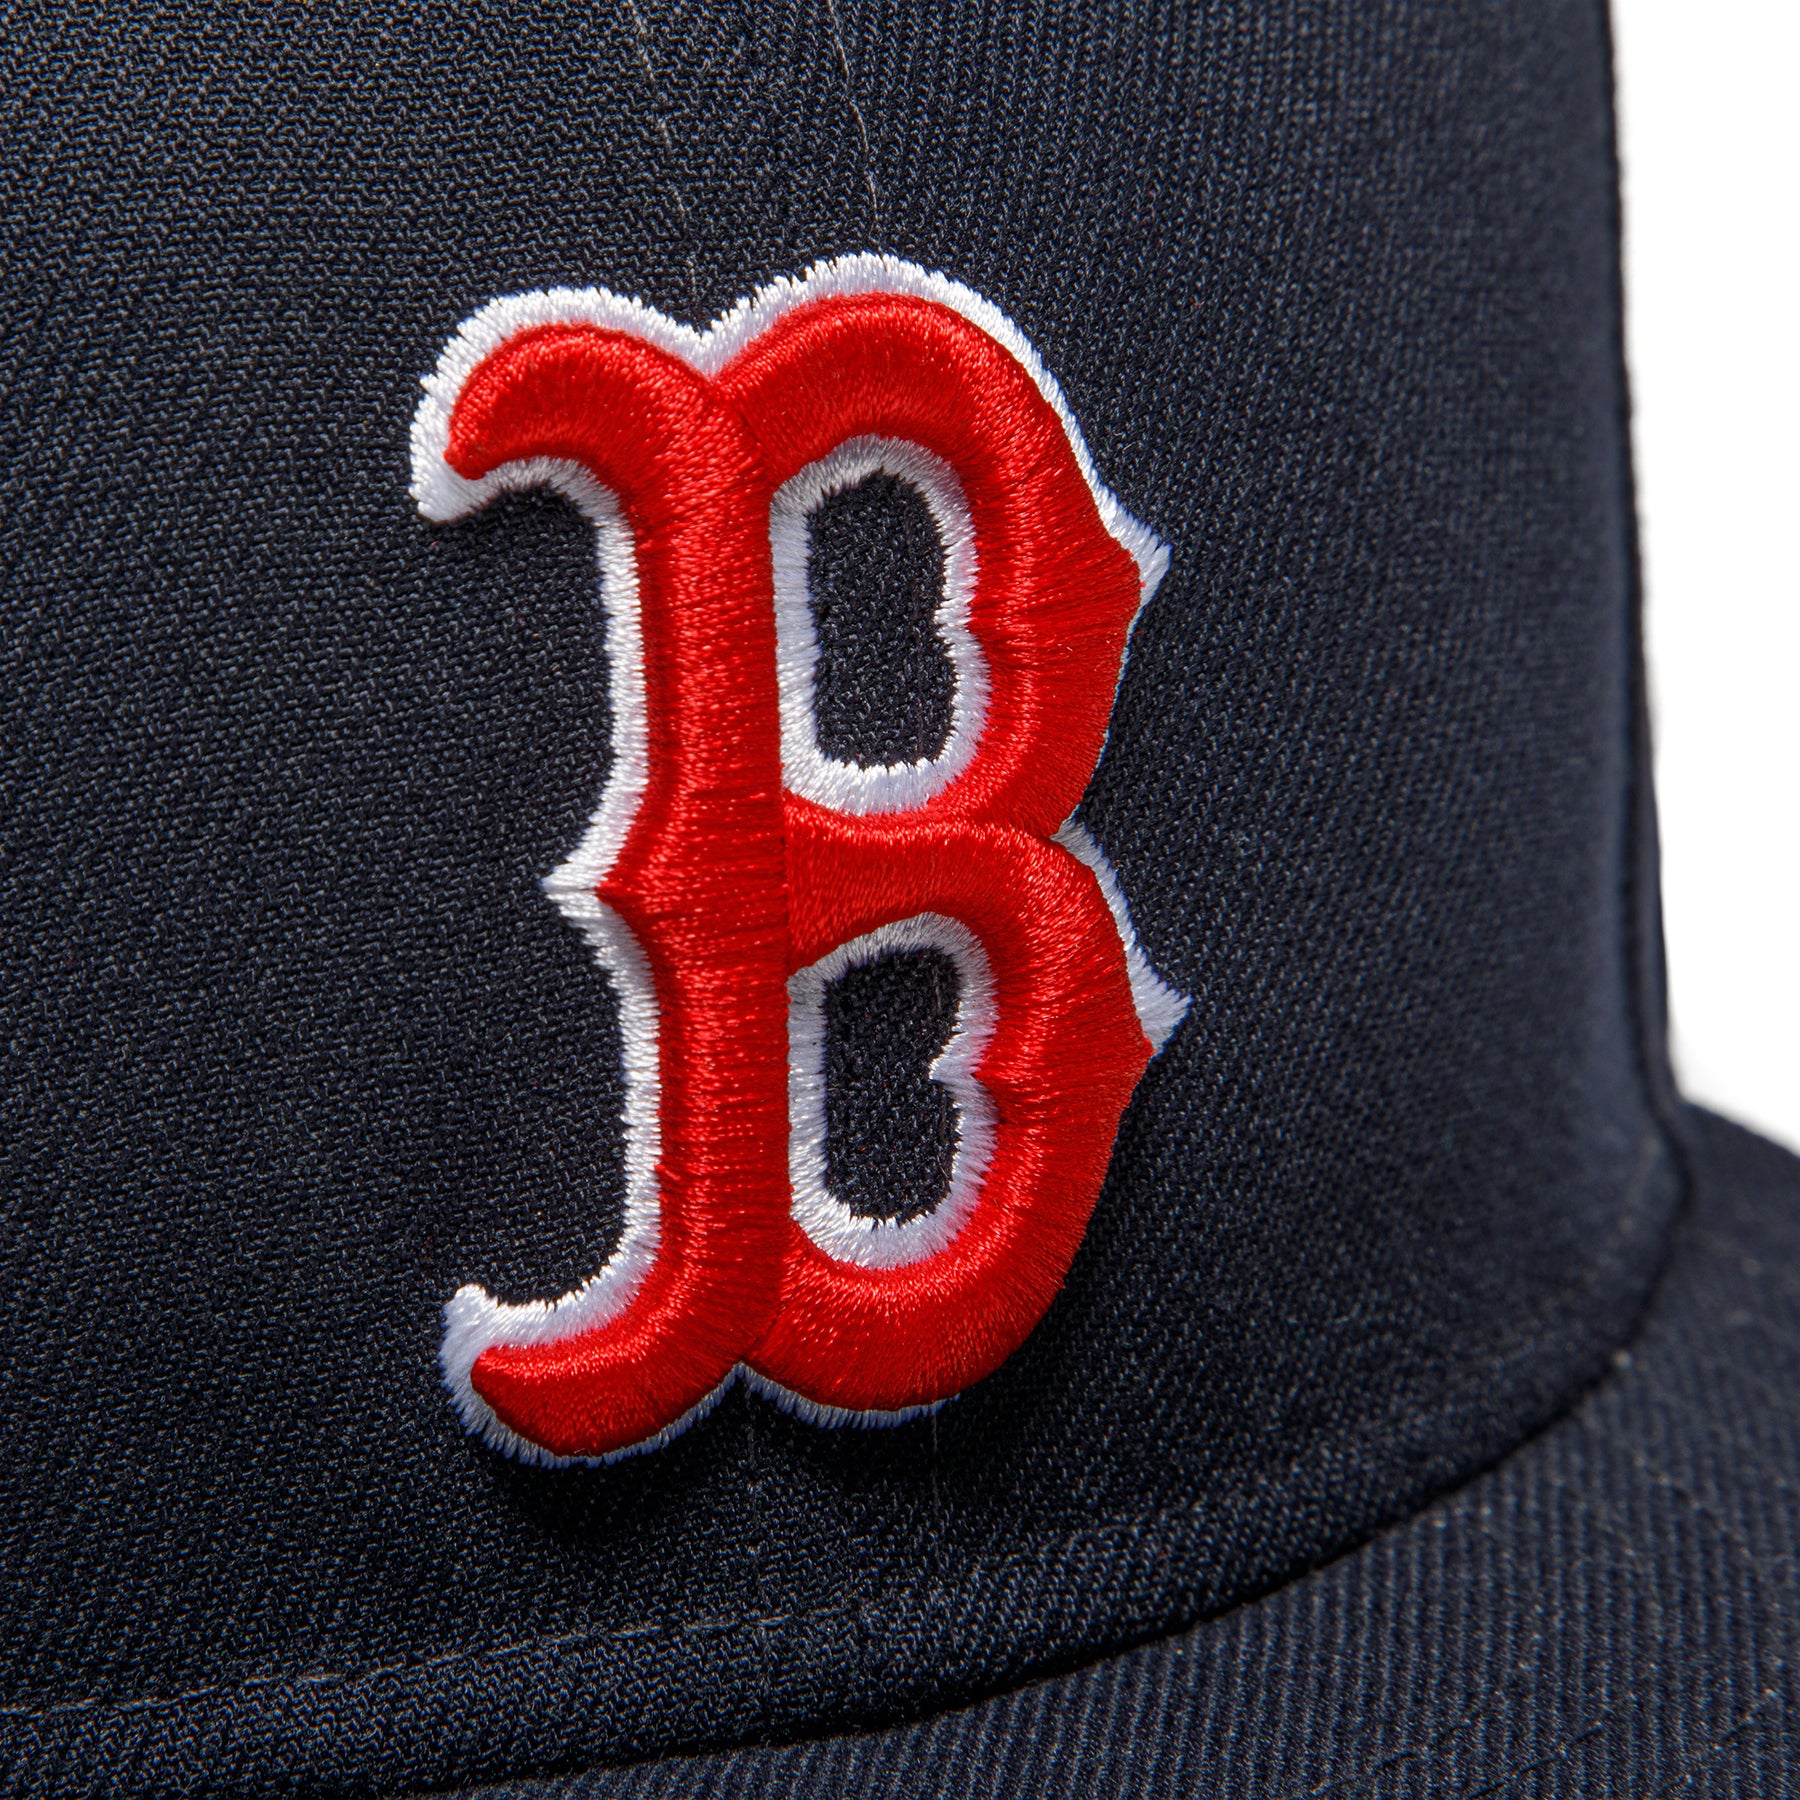 Boston Red Sox New Era Alternate Authentic Collection On-Field 59FIFTY Fitted Hat - Navy